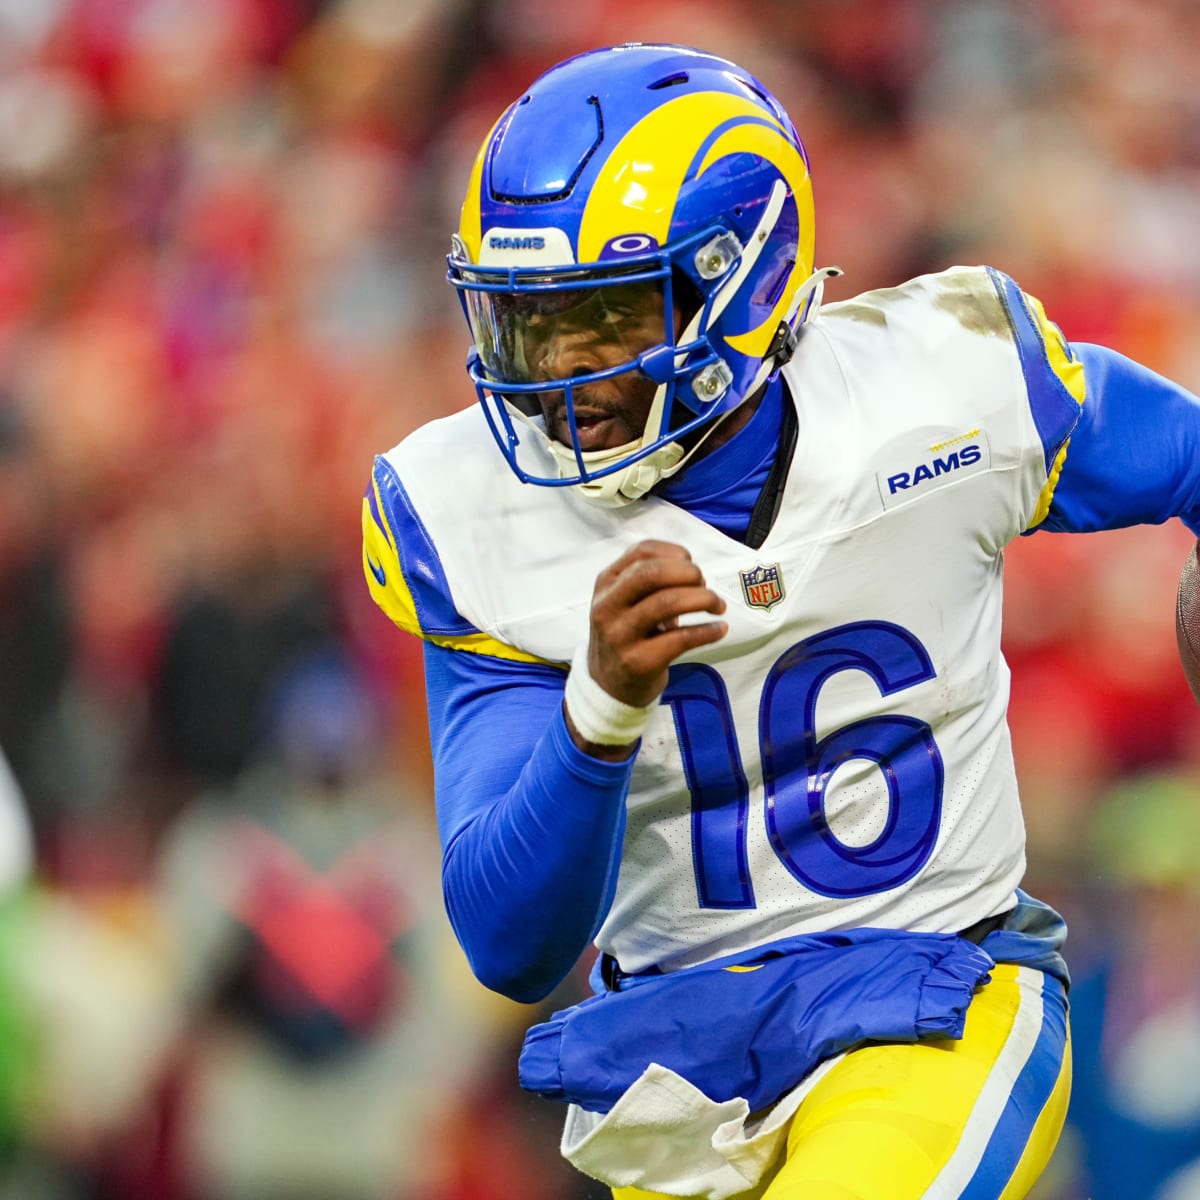 Chiefs-Rams: QB Stafford out, LA to start backup Bryce Perkins